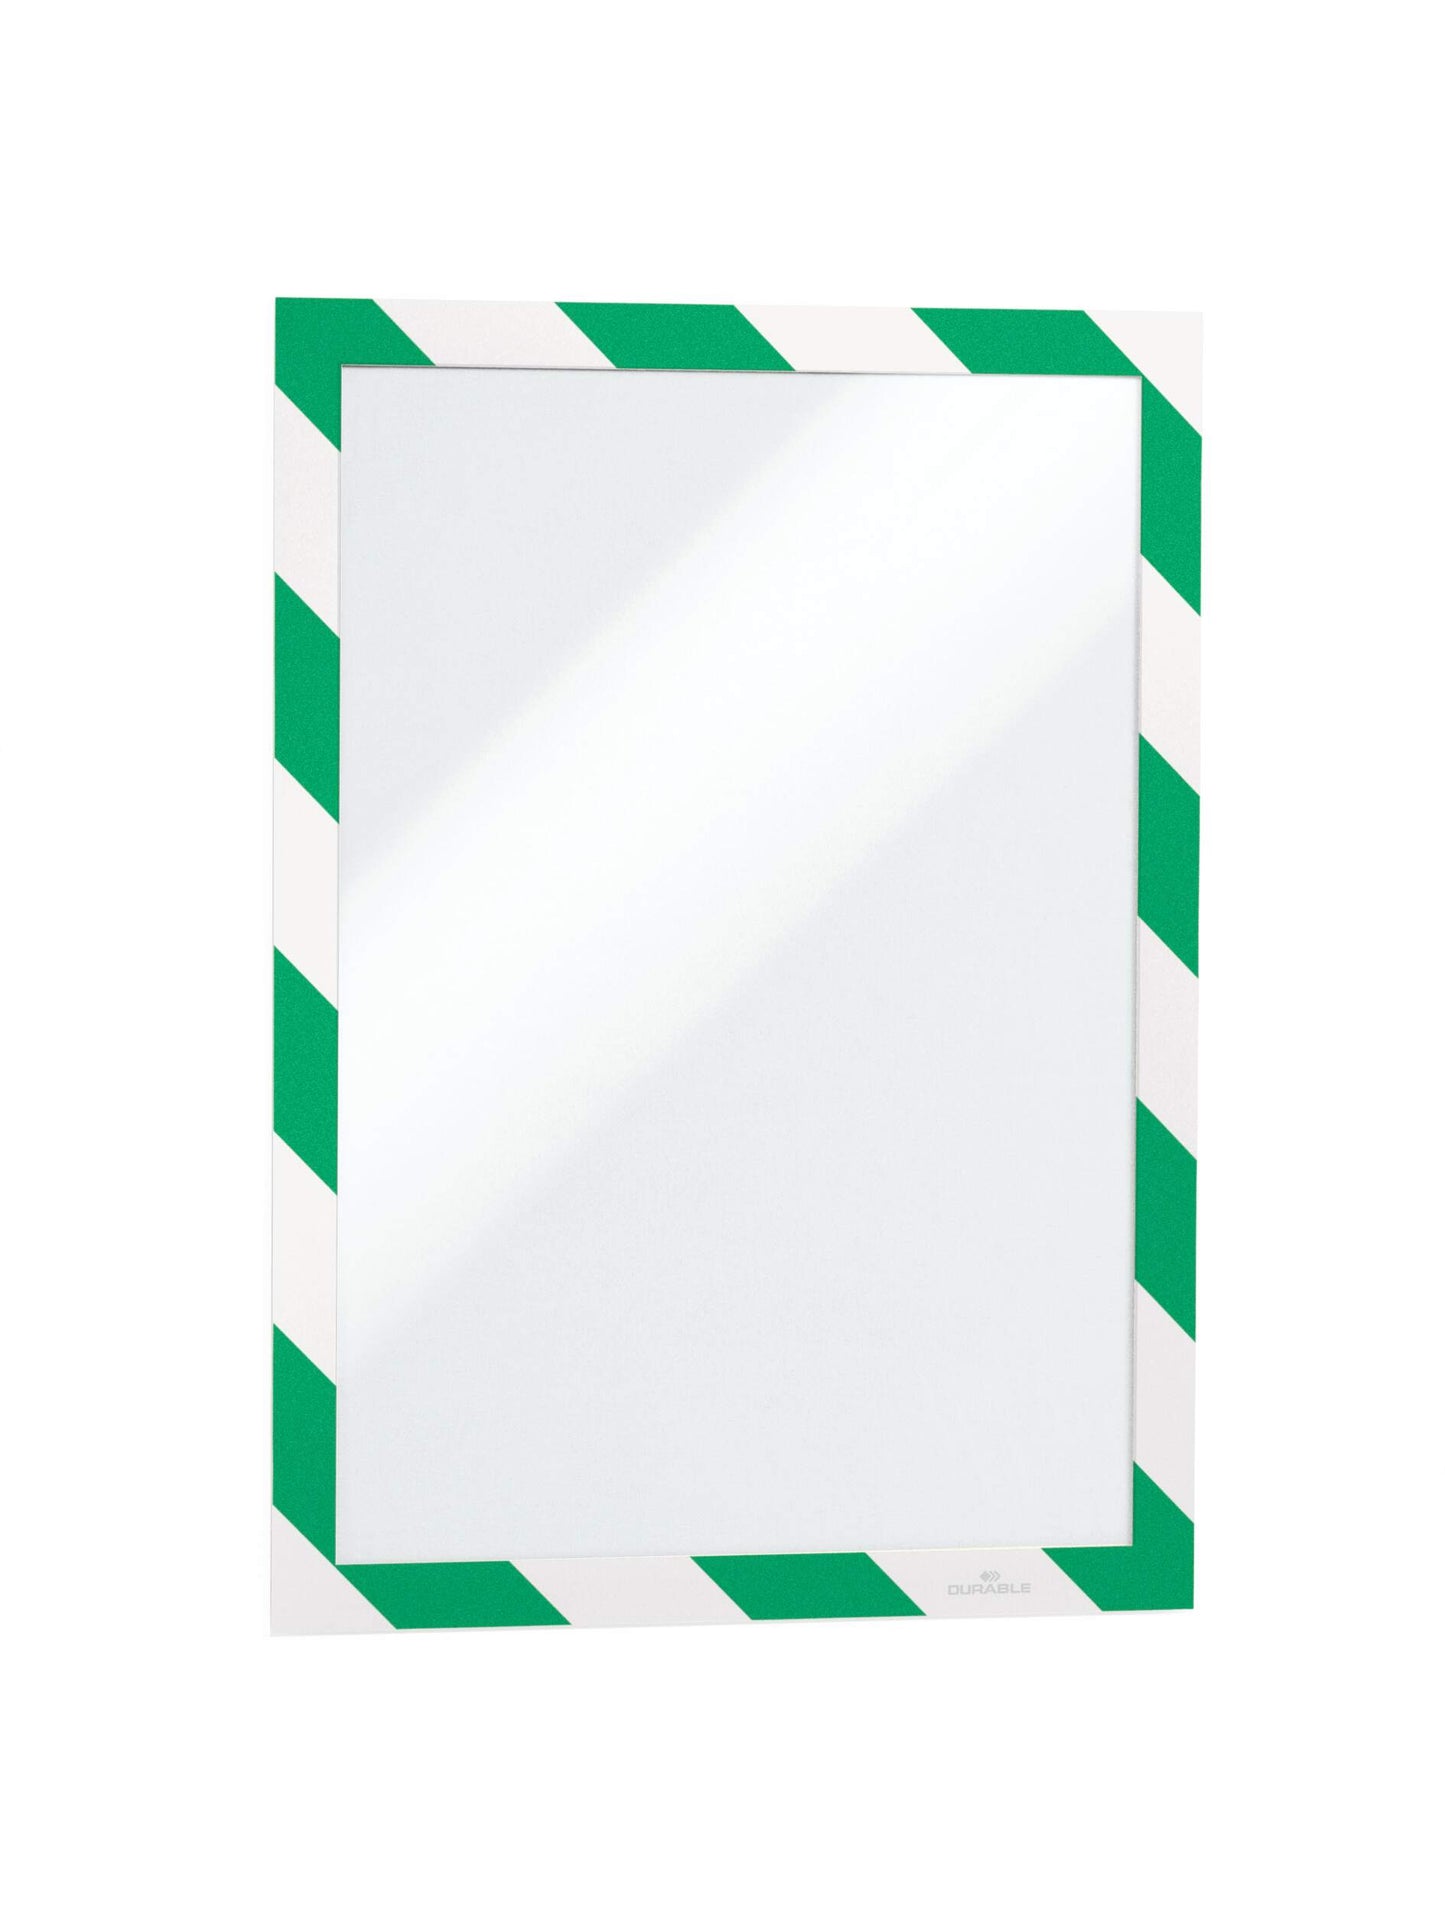 Durable DURAFRAME Adhesive Magnetic Signage Hazard Frame | 2 Pack | A4 Green